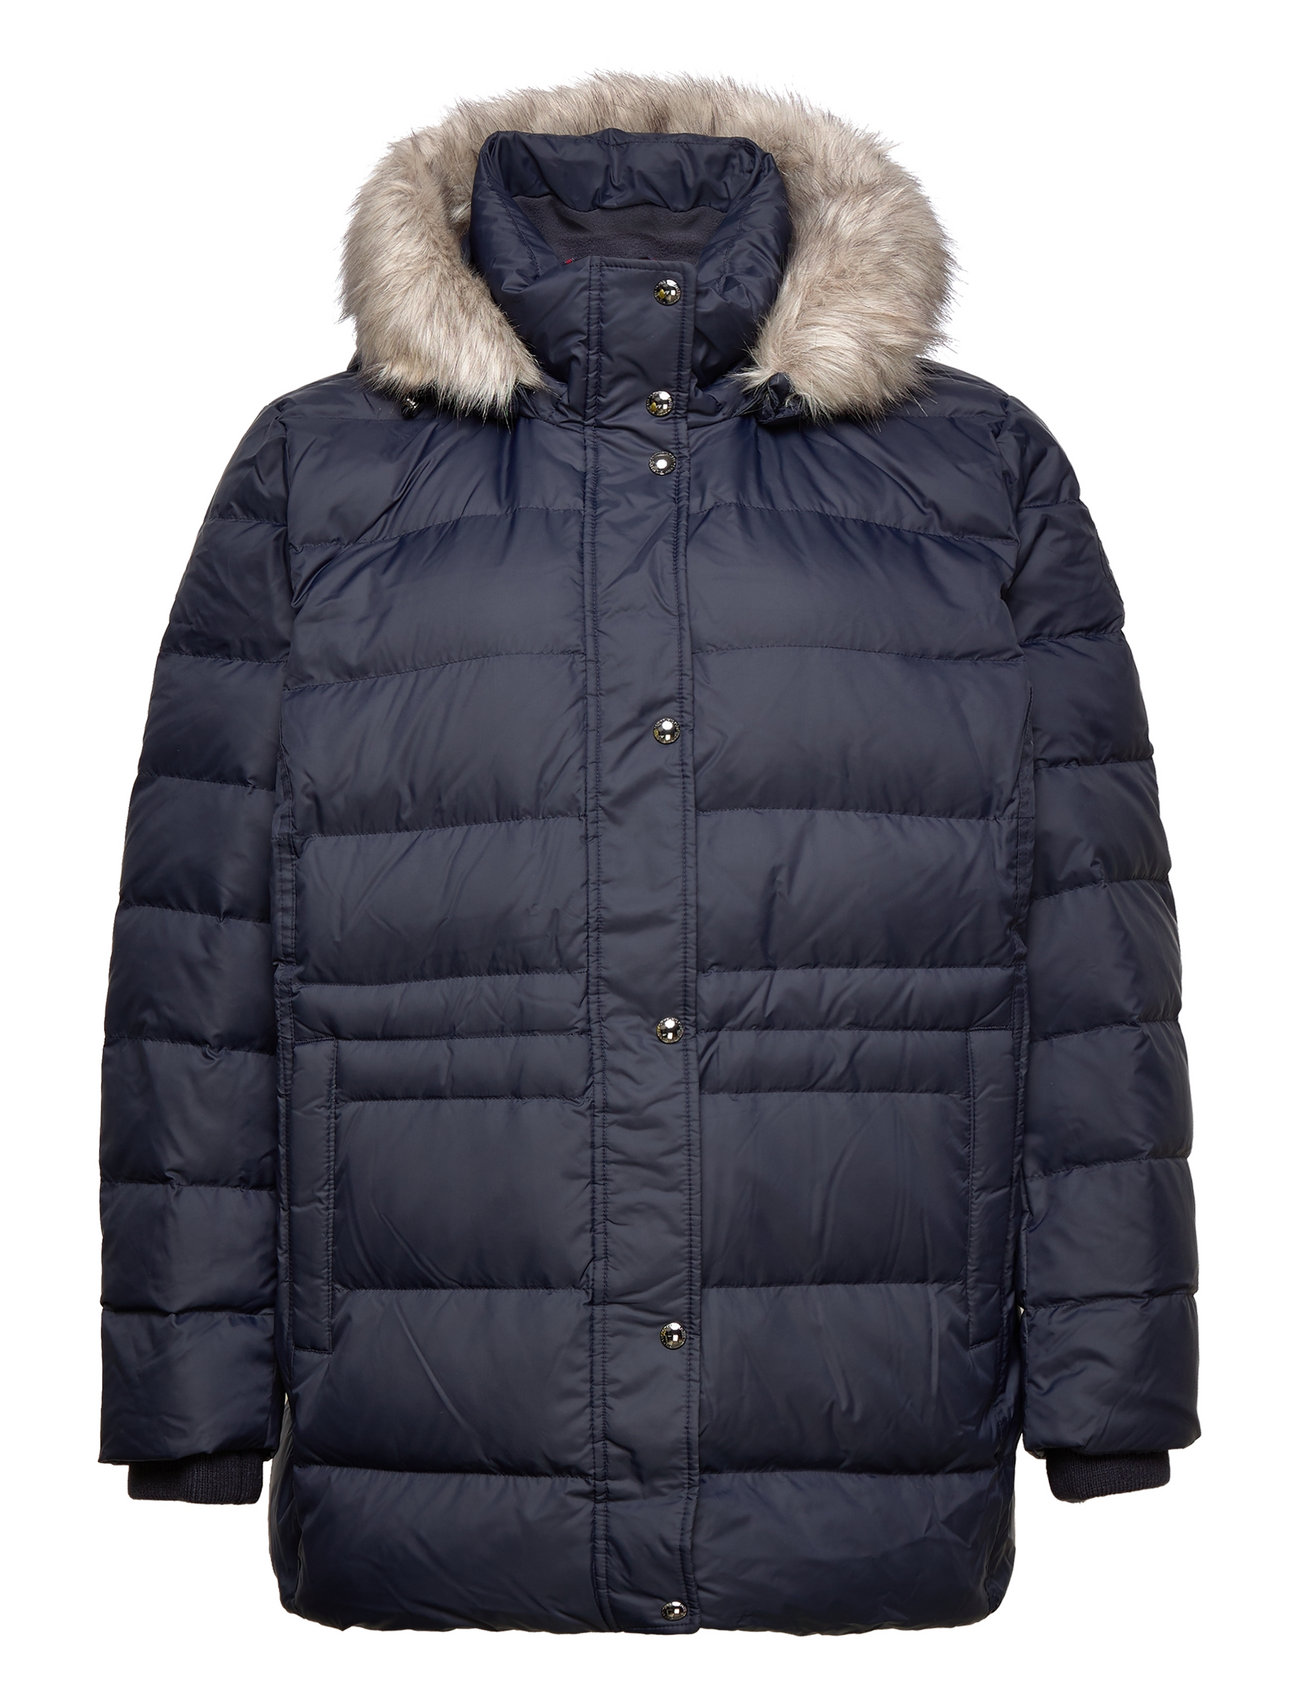 Hilfiger returns Down Coats Fast Ess online Boozt.com. Hilfiger at Padded Tommy delivery Buy Crv - easy Th €. 329.90 and Tommy Fur from Tyra Jkt